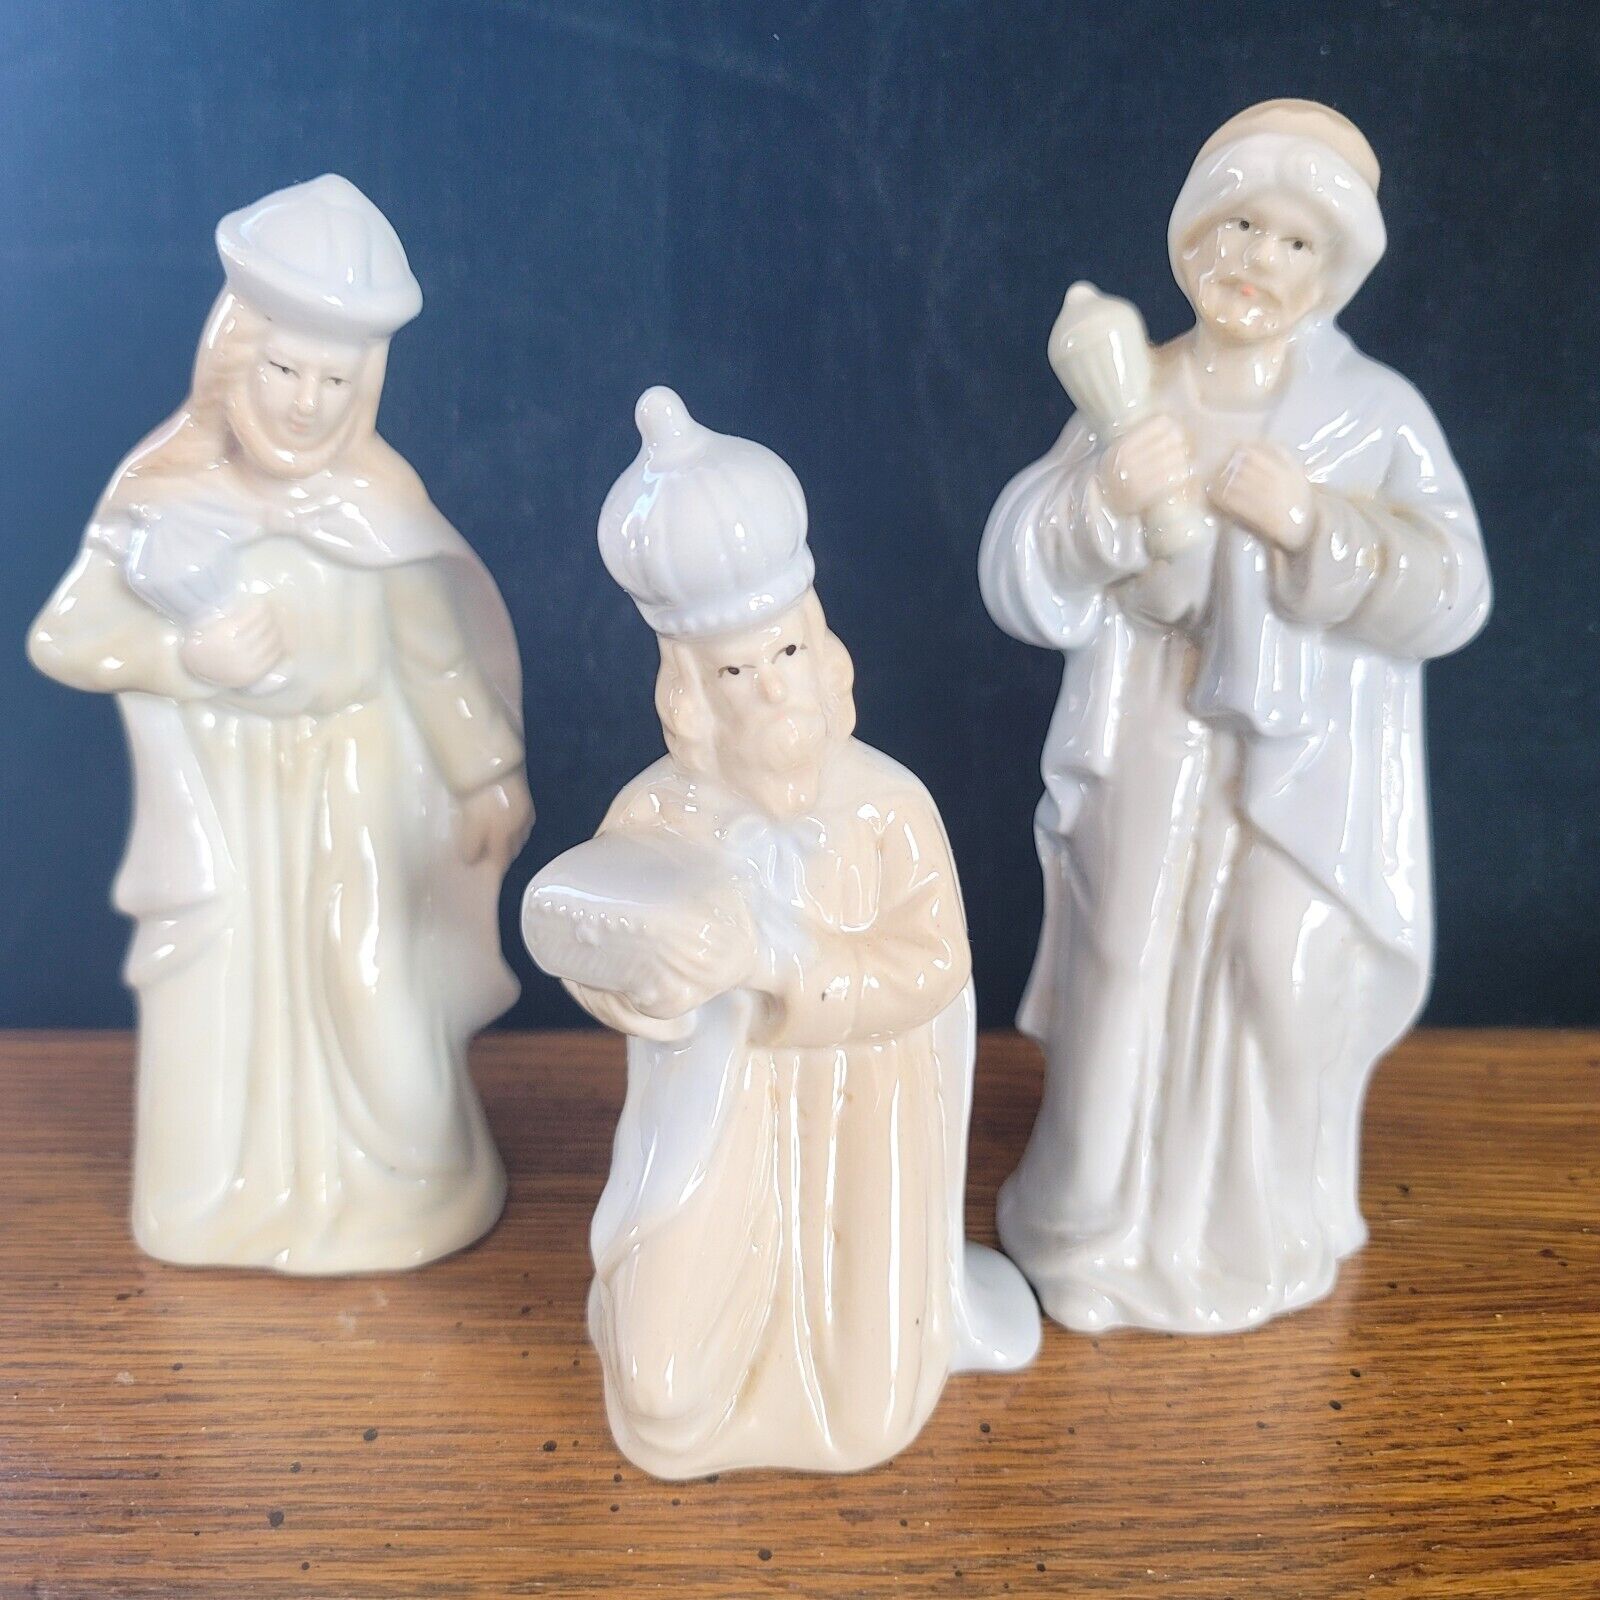 3 Wisemen China Figurines Nativity Set Pastel Colors 6.25 5.75 & 5 inches Tall